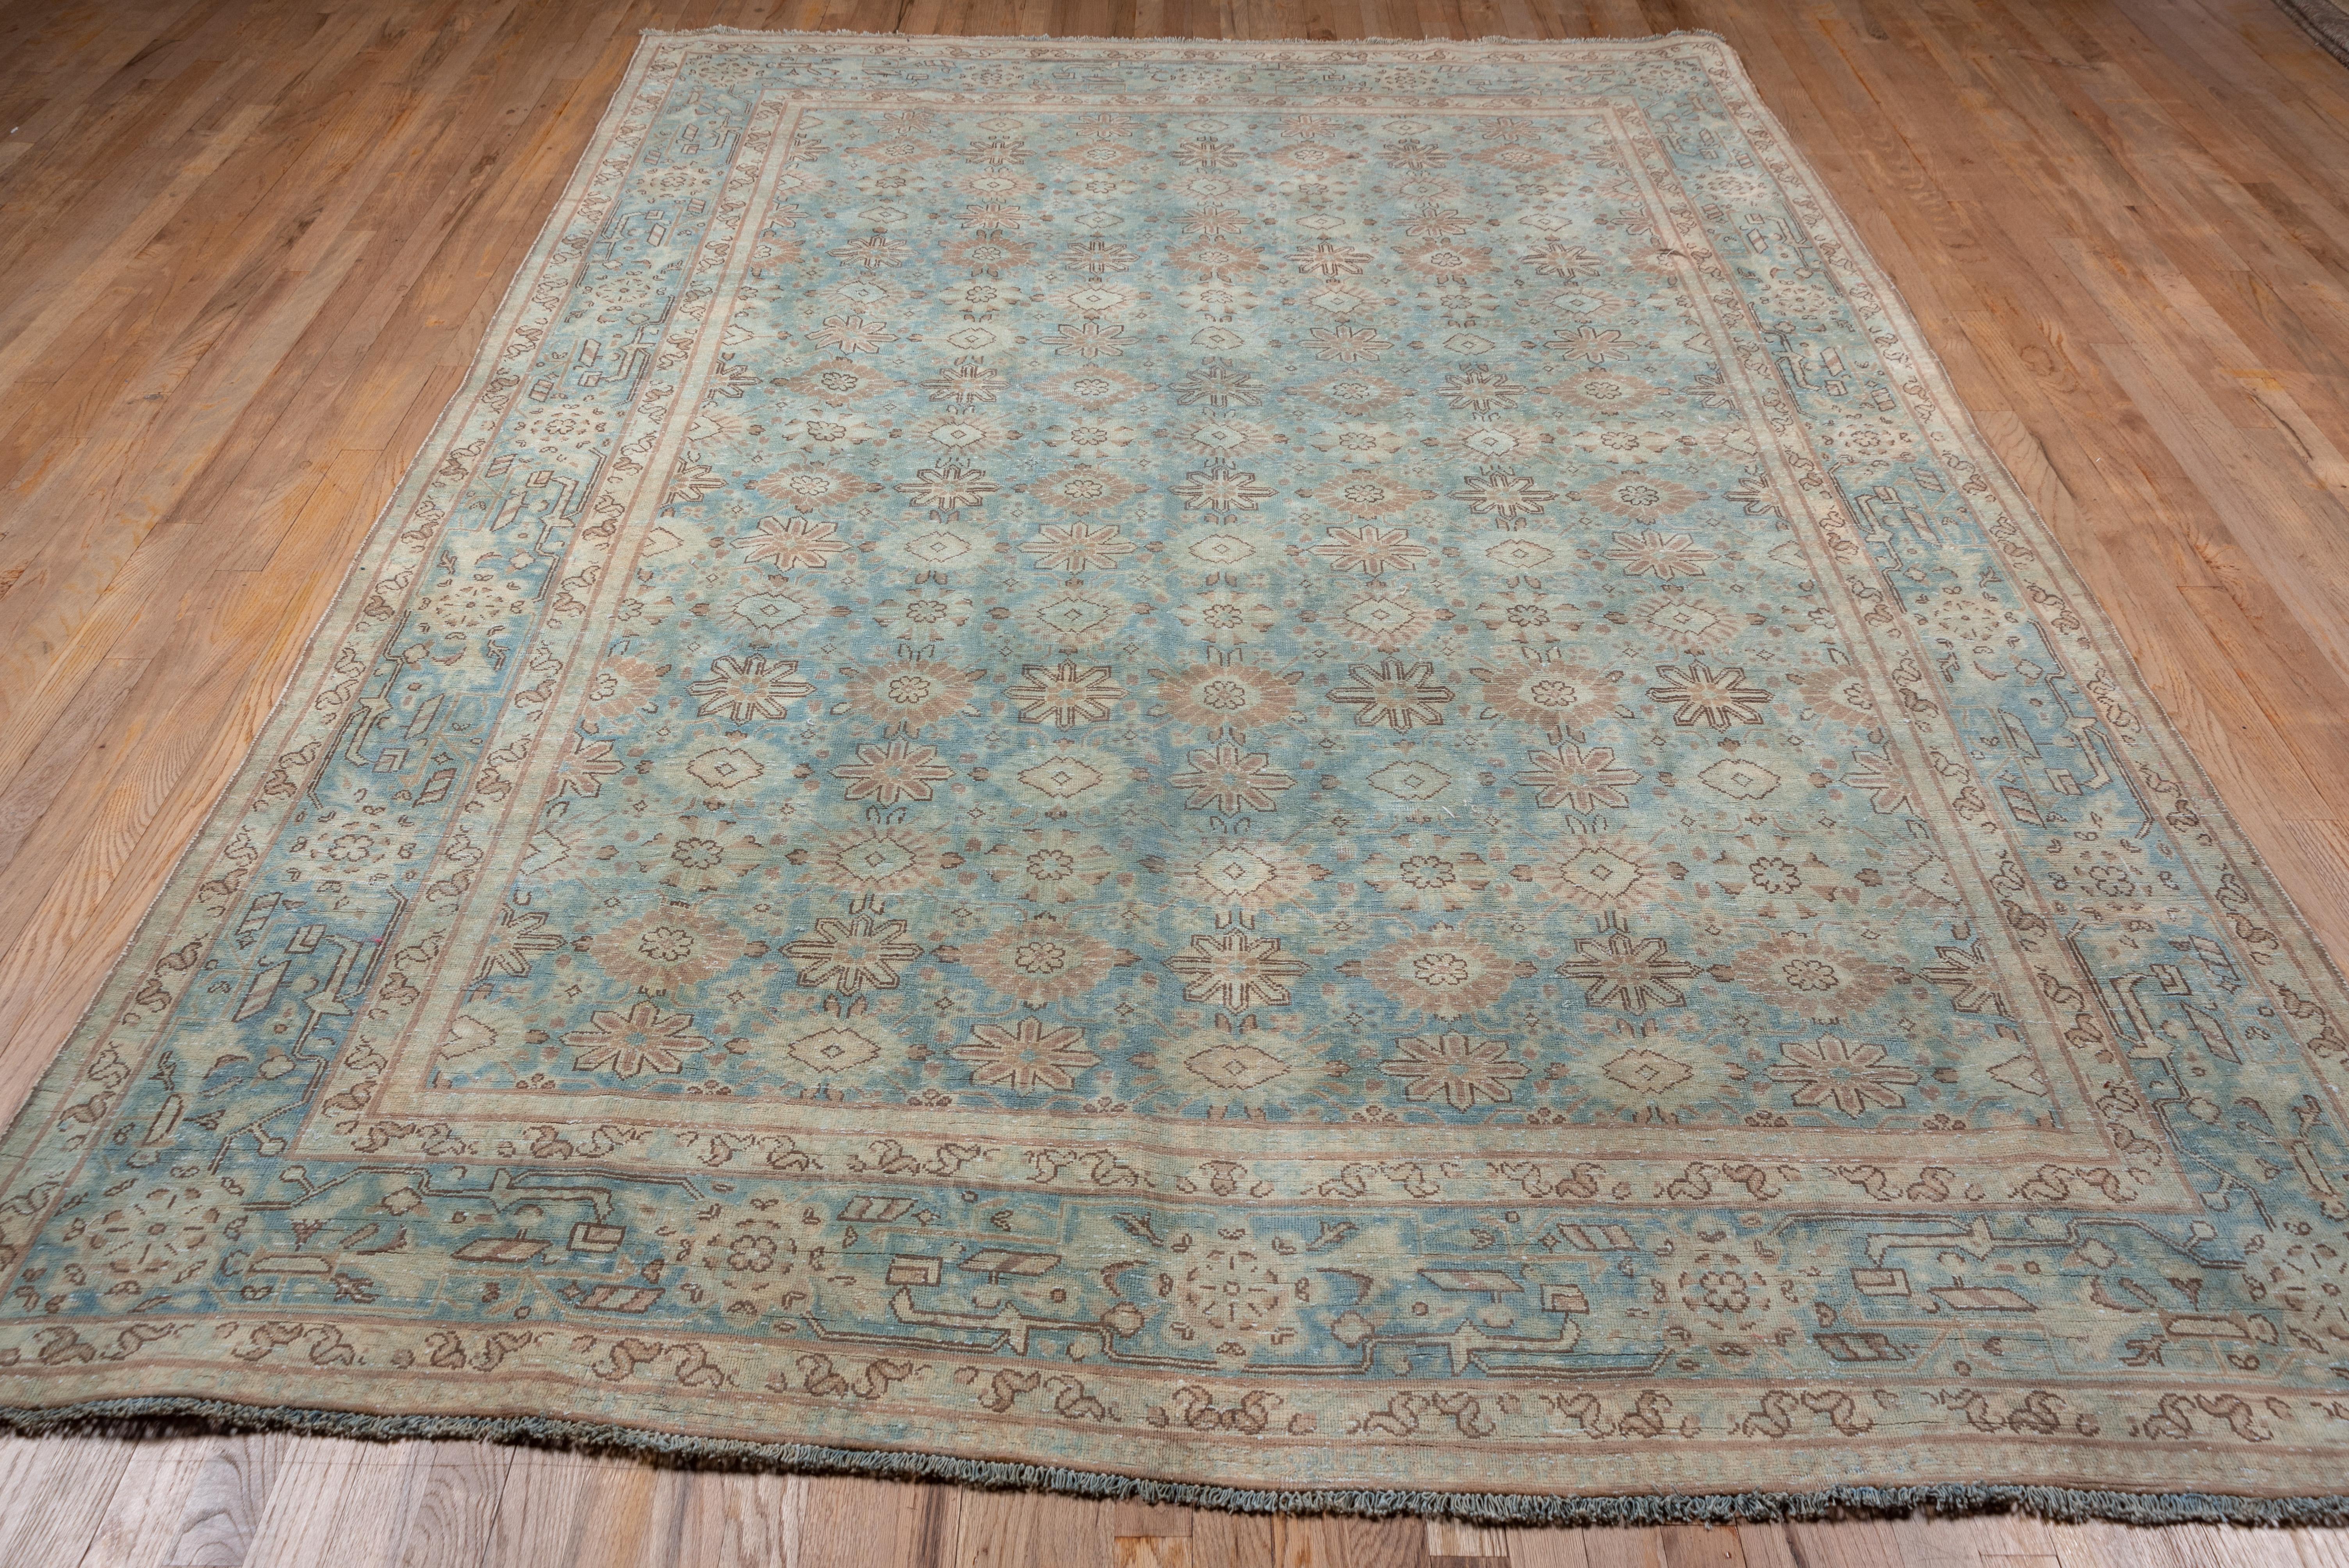 Hand-Knotted Antique Blue Persian Kerman Area Rug, Light Blue Allover Field, circa 1930s For Sale